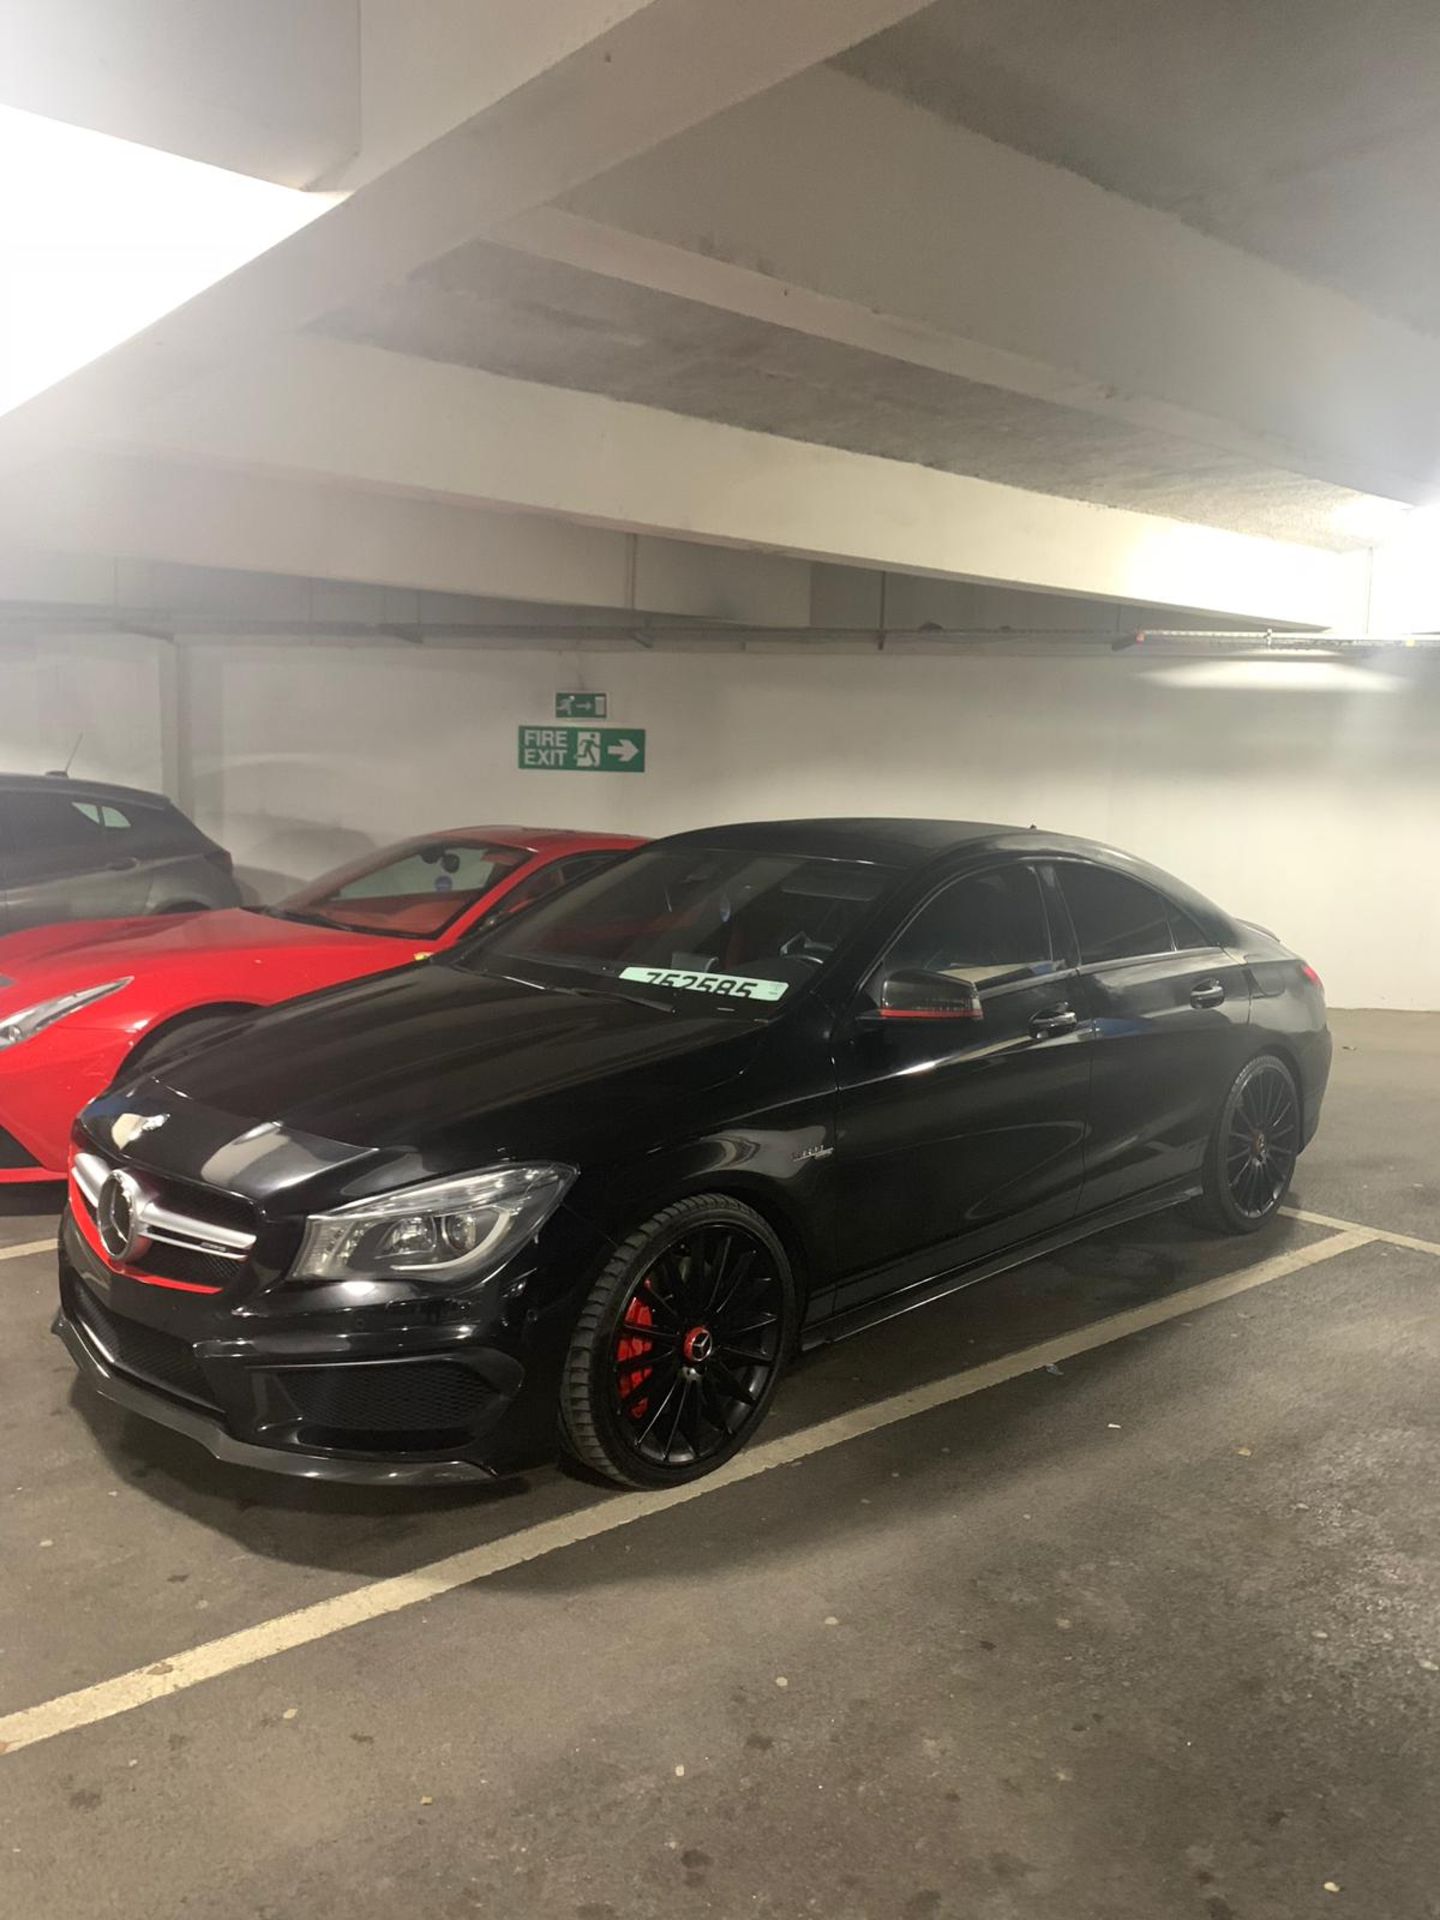 RARE 2015 MERCEDES-BENZ CLA45 AMG 4 MATIC SPECIAL EDITION 1, 355 BHP, 40,000KM / 25,000 MILES - Image 4 of 15